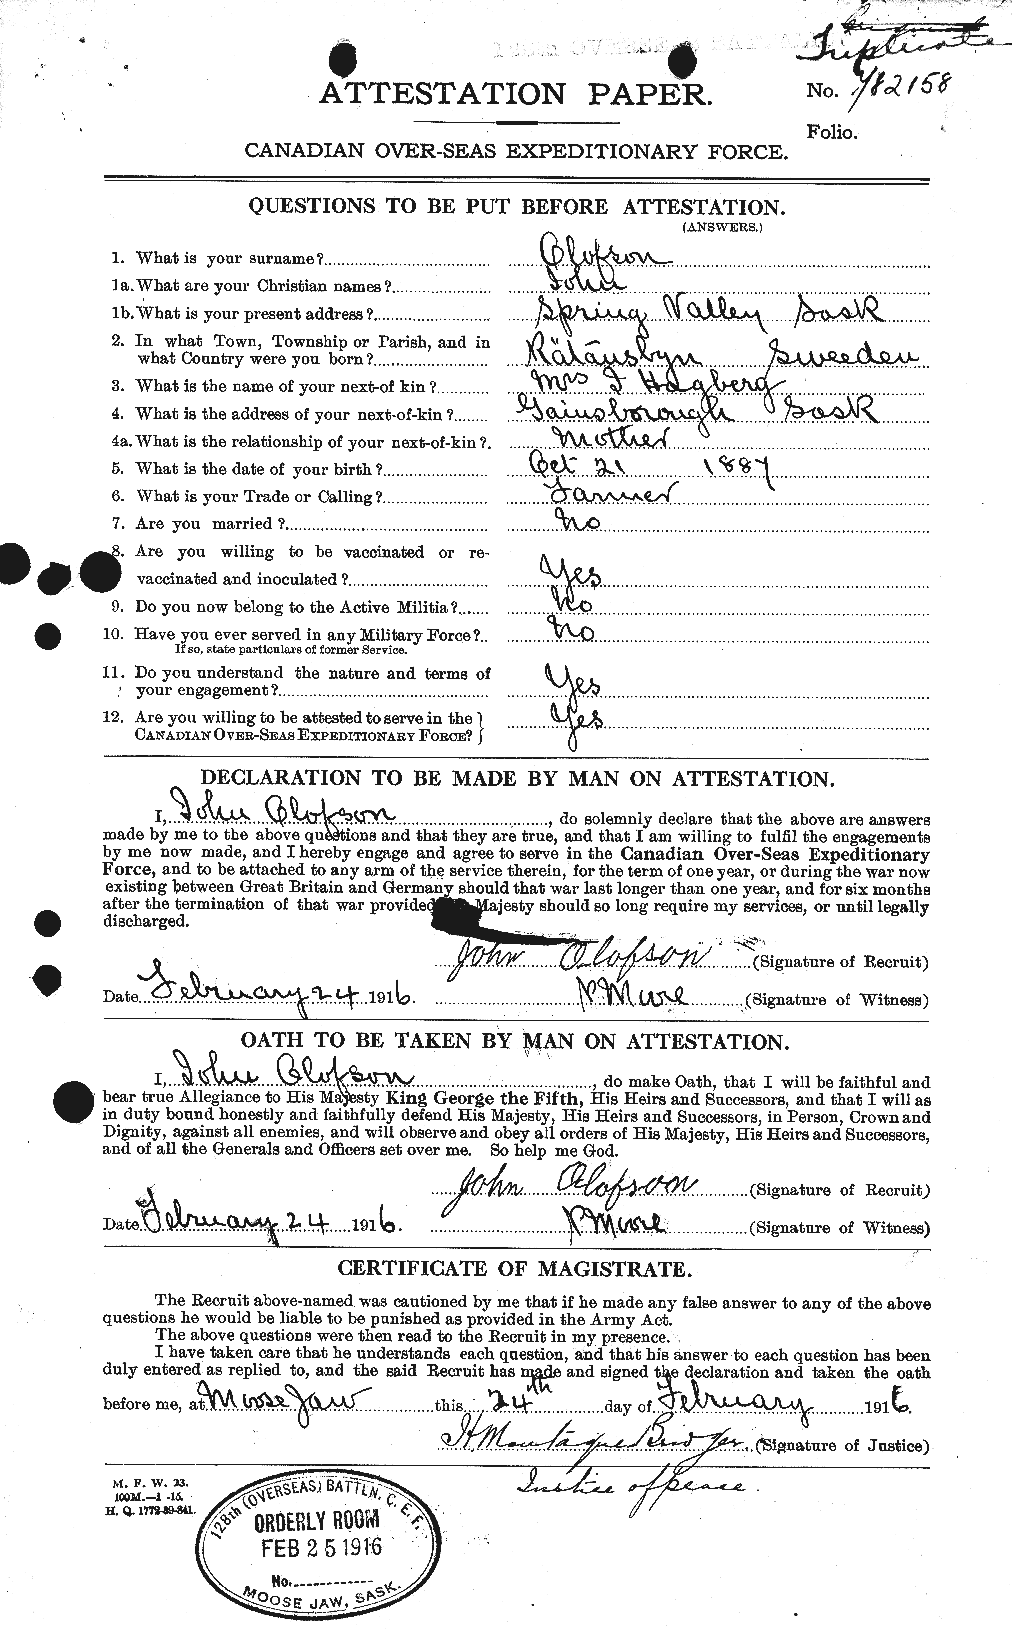 Personnel Records of the First World War - CEF 555724a